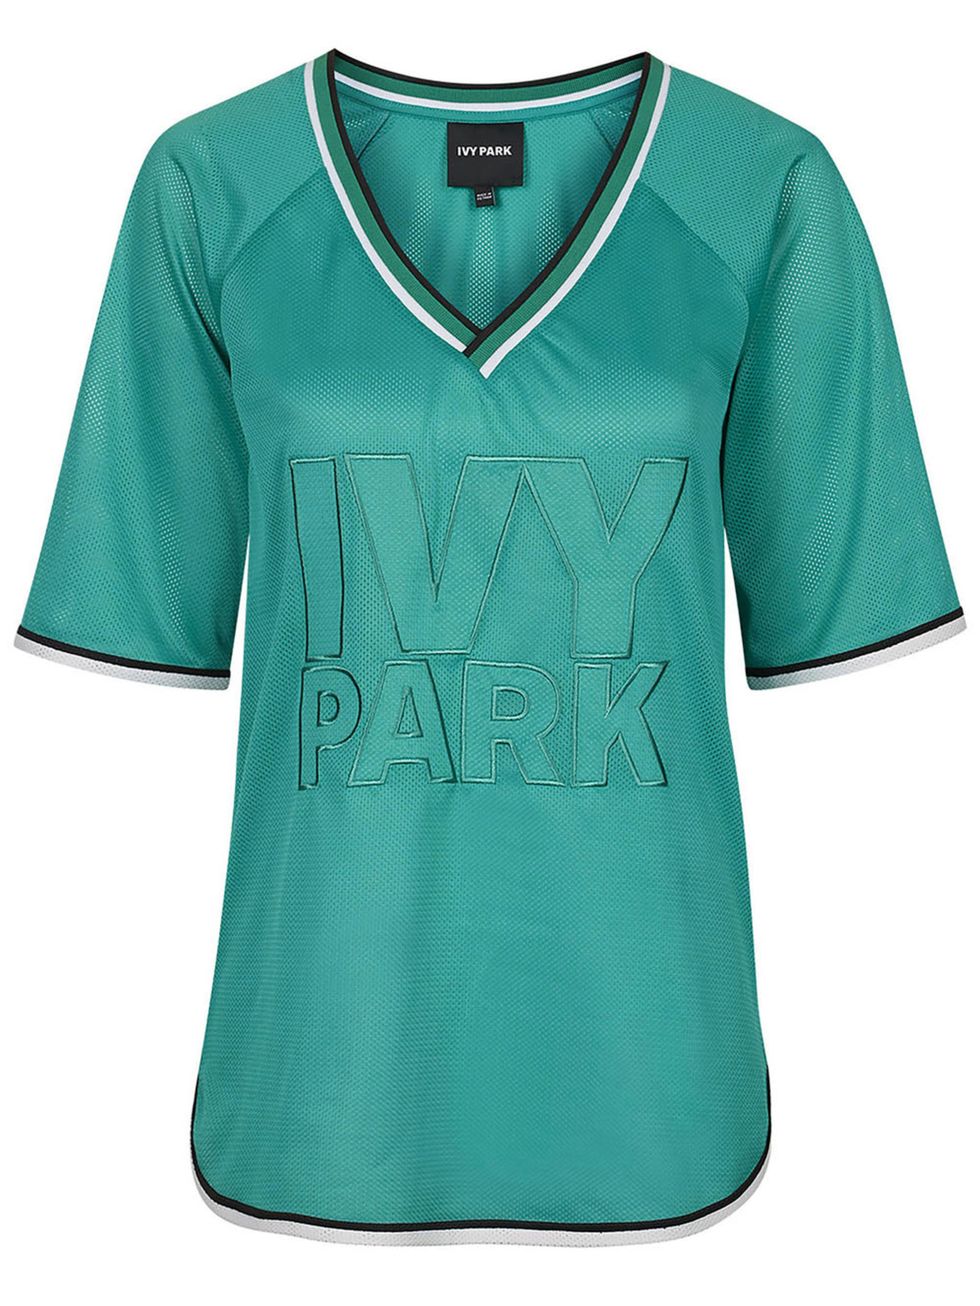 Blue, Product, Green, Sportswear, Sleeve, Jersey, Collar, Text, White, Teal, 